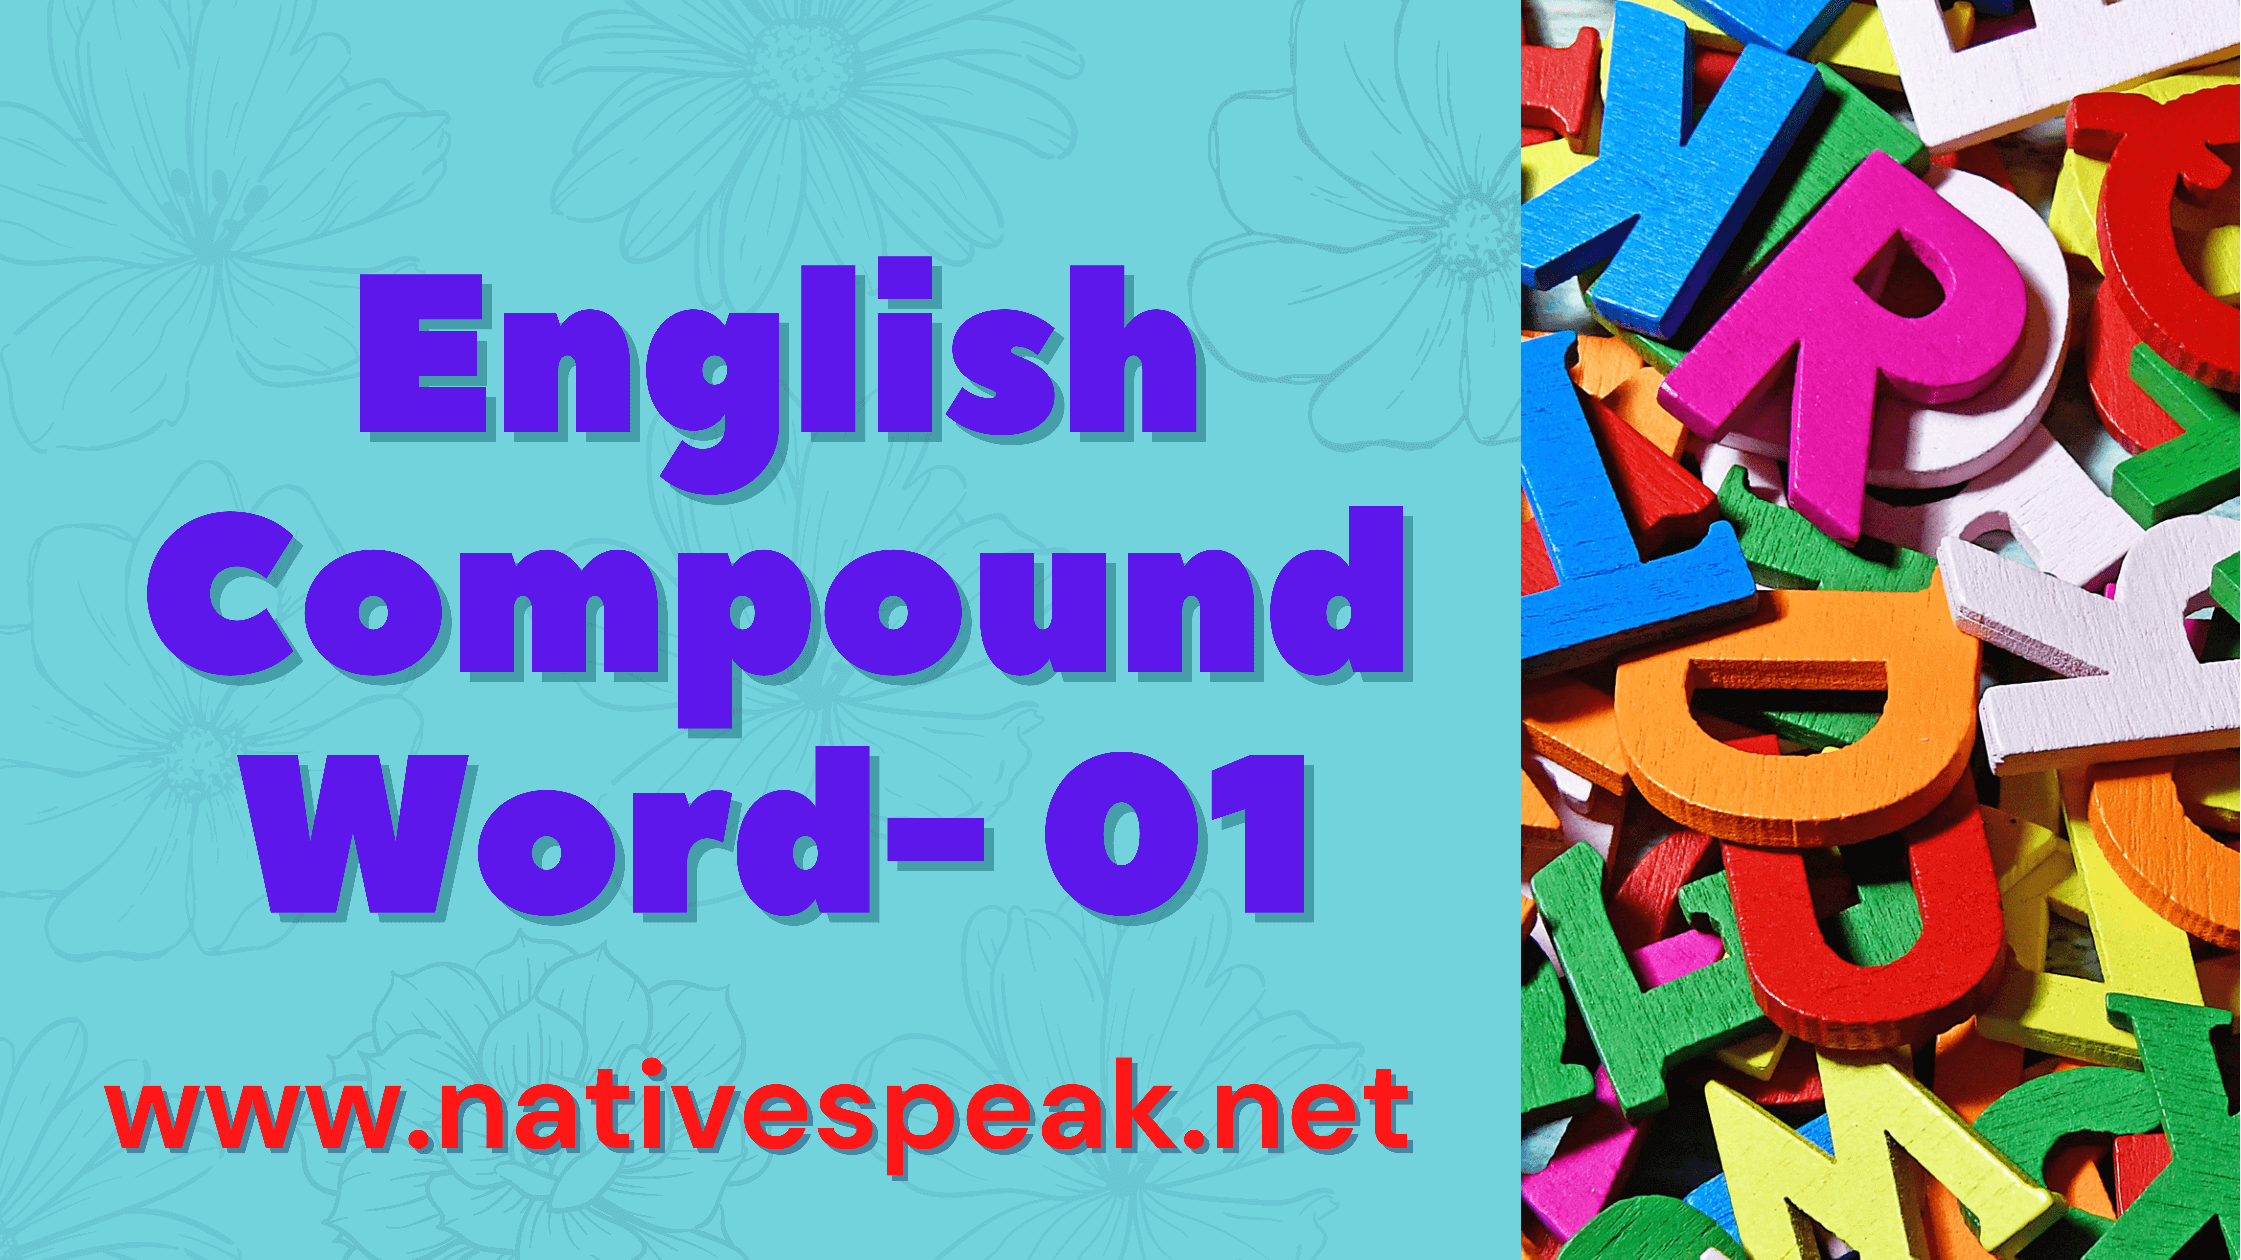 English Compound Words To Increase Your Vocabulary Naturally